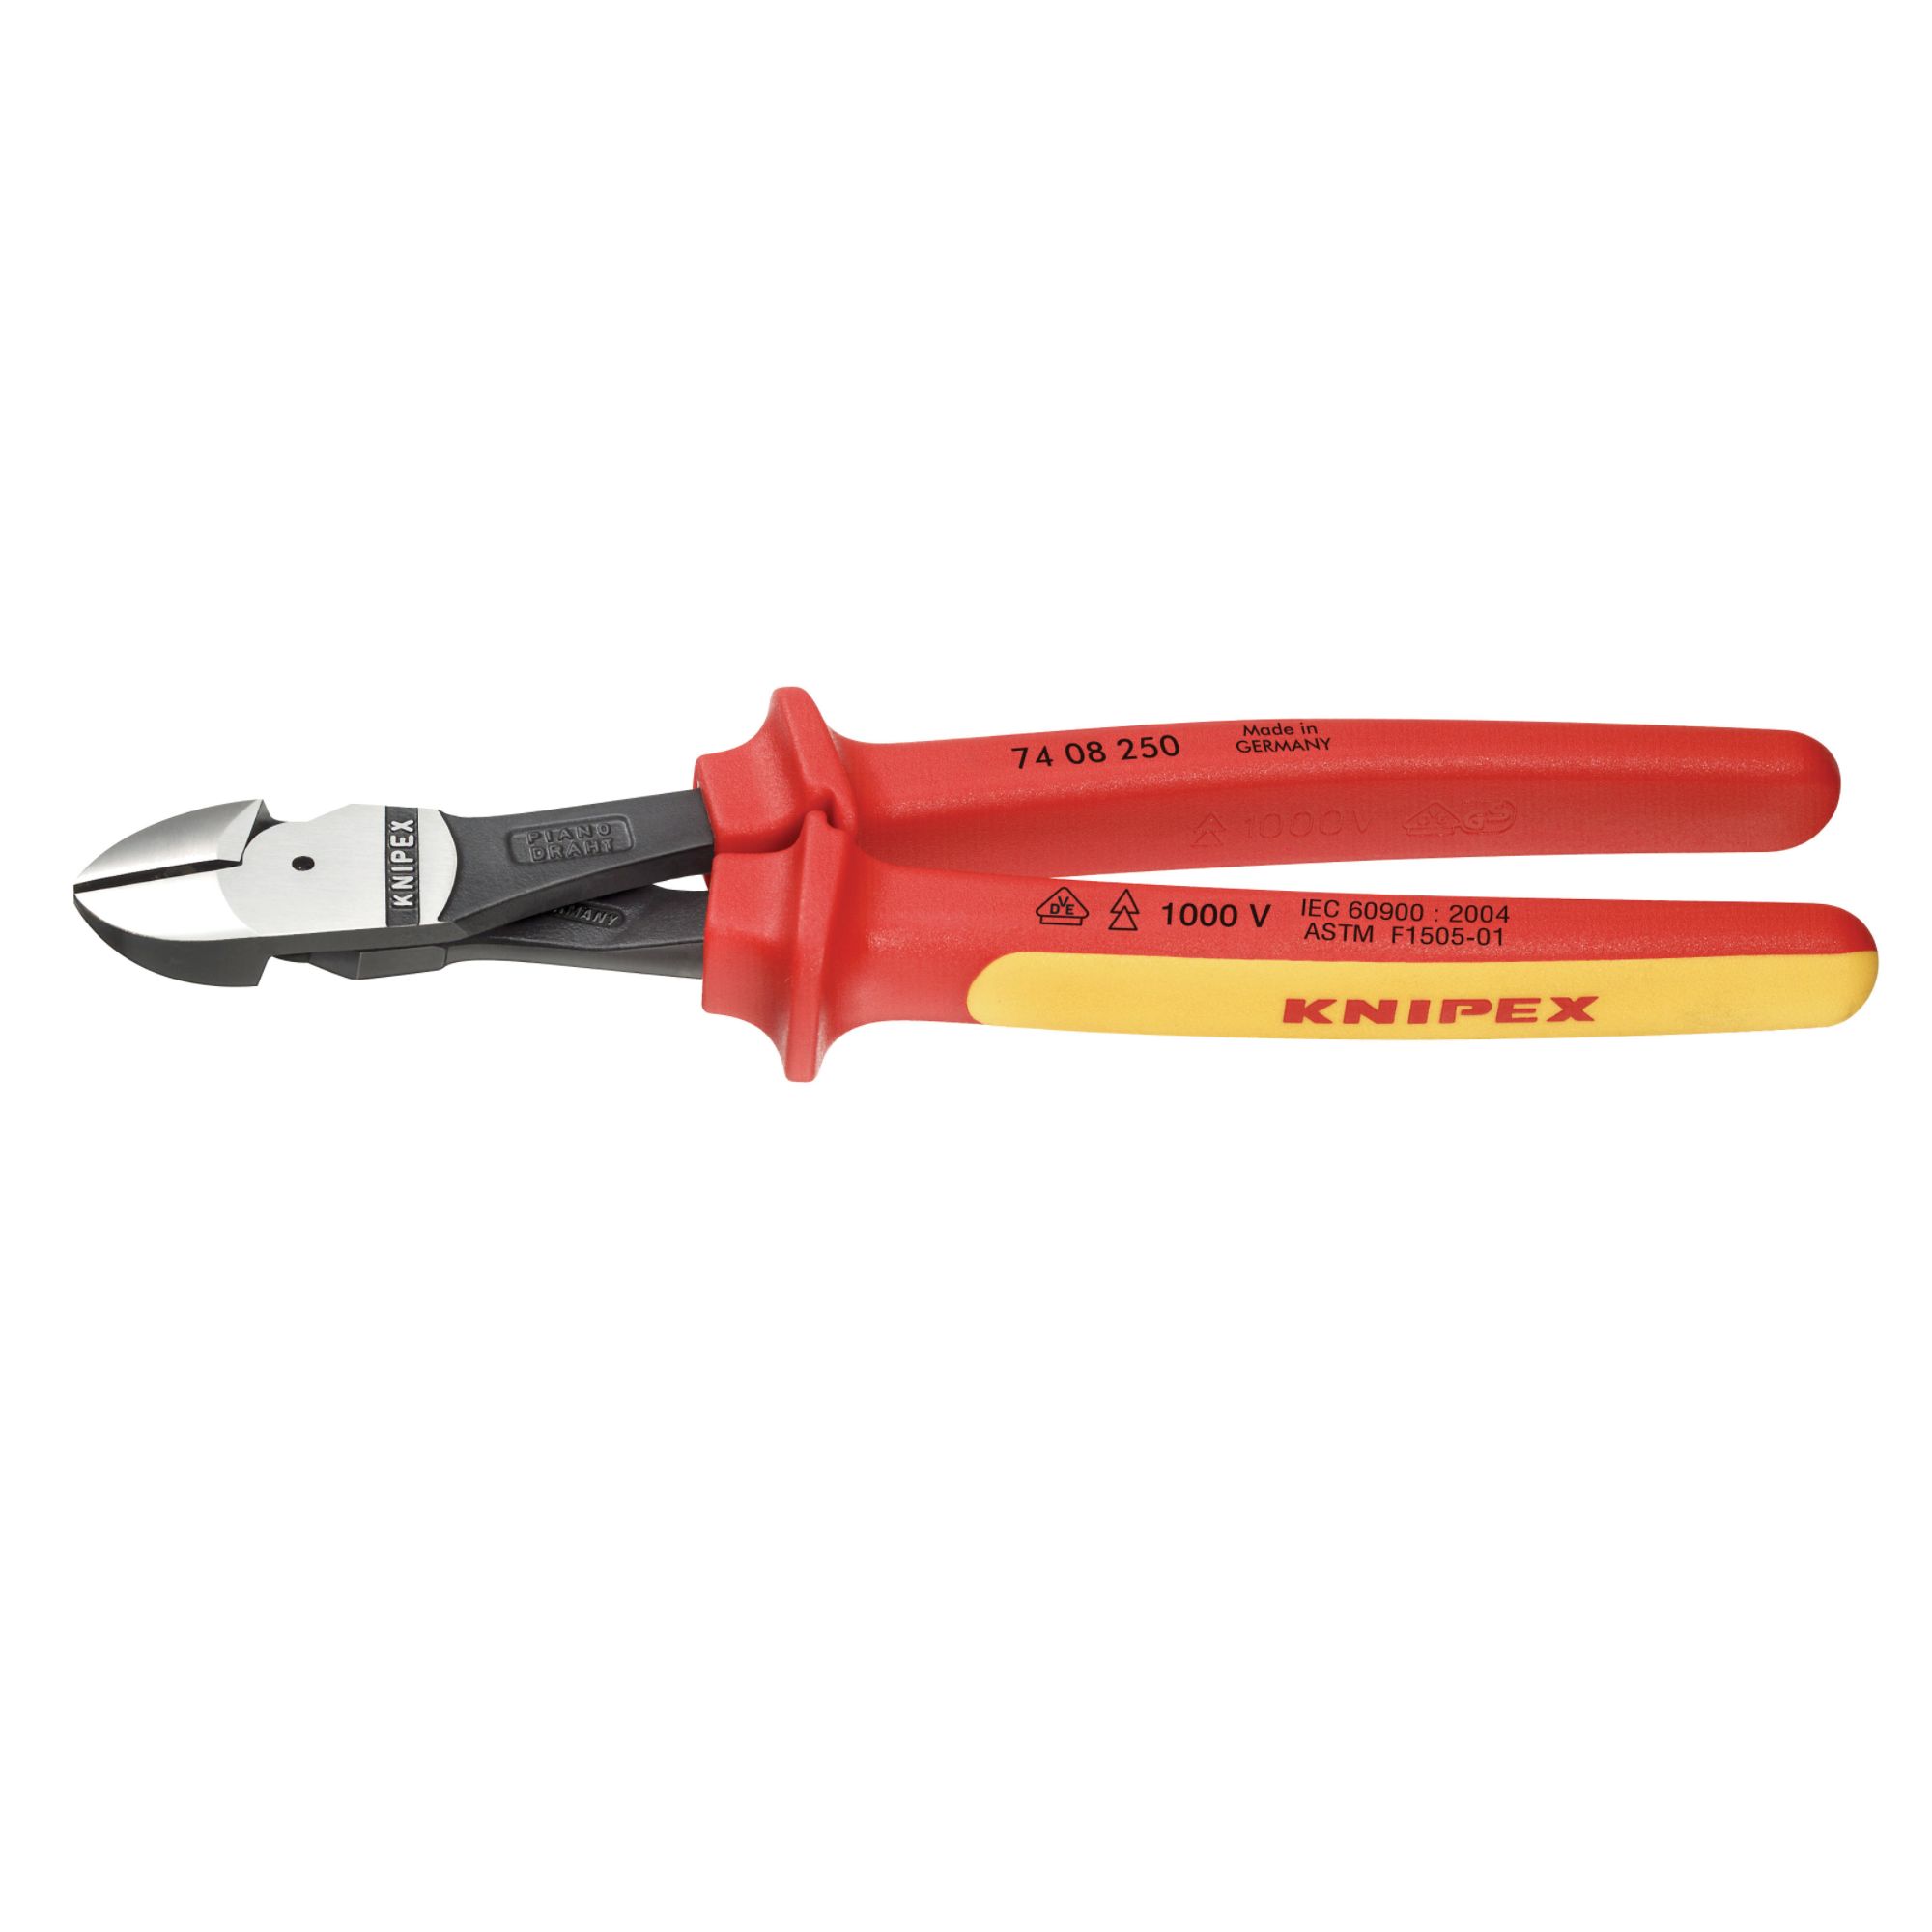 Knipex 10" High leverage diagonal cutters - 1000V